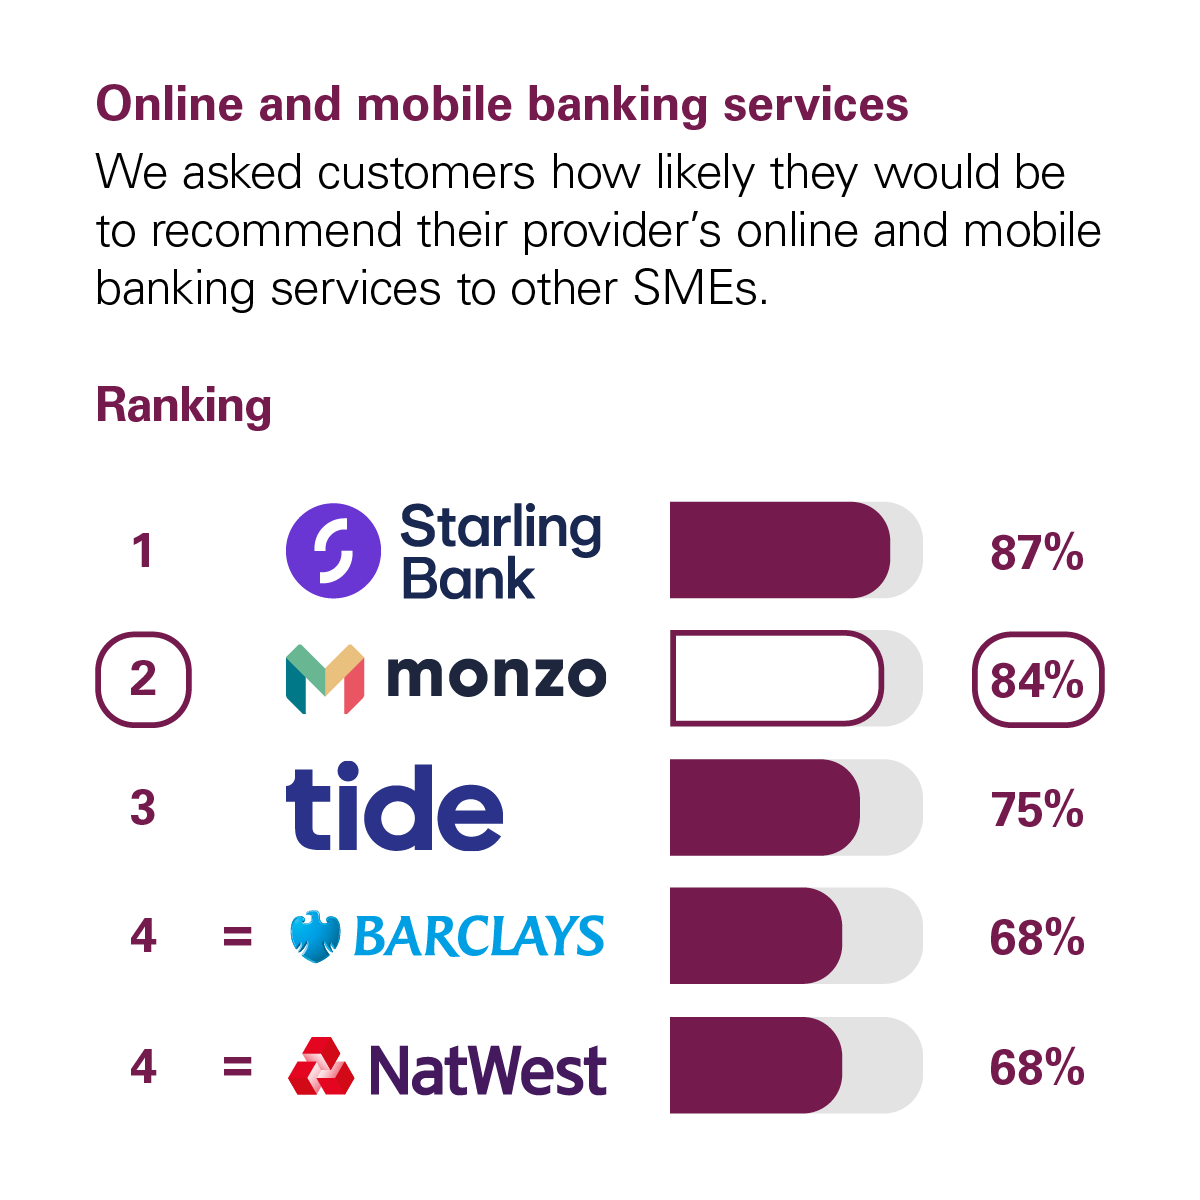 Graph showing the results of the CMA scoring of UK banks in the Online and Mobile Banking Services category. The CMA asked customers how likely they would be to recommend their provider's online and mobile banking services to other small and medium-sized enterprises (SMEs*). The rankings with percentage scores are: 1st Starling Bank with 87%. 2nd Monzo with 84%. 3rd Tide with 75%. Joint 4th are Barclays and Natwest with 68%.